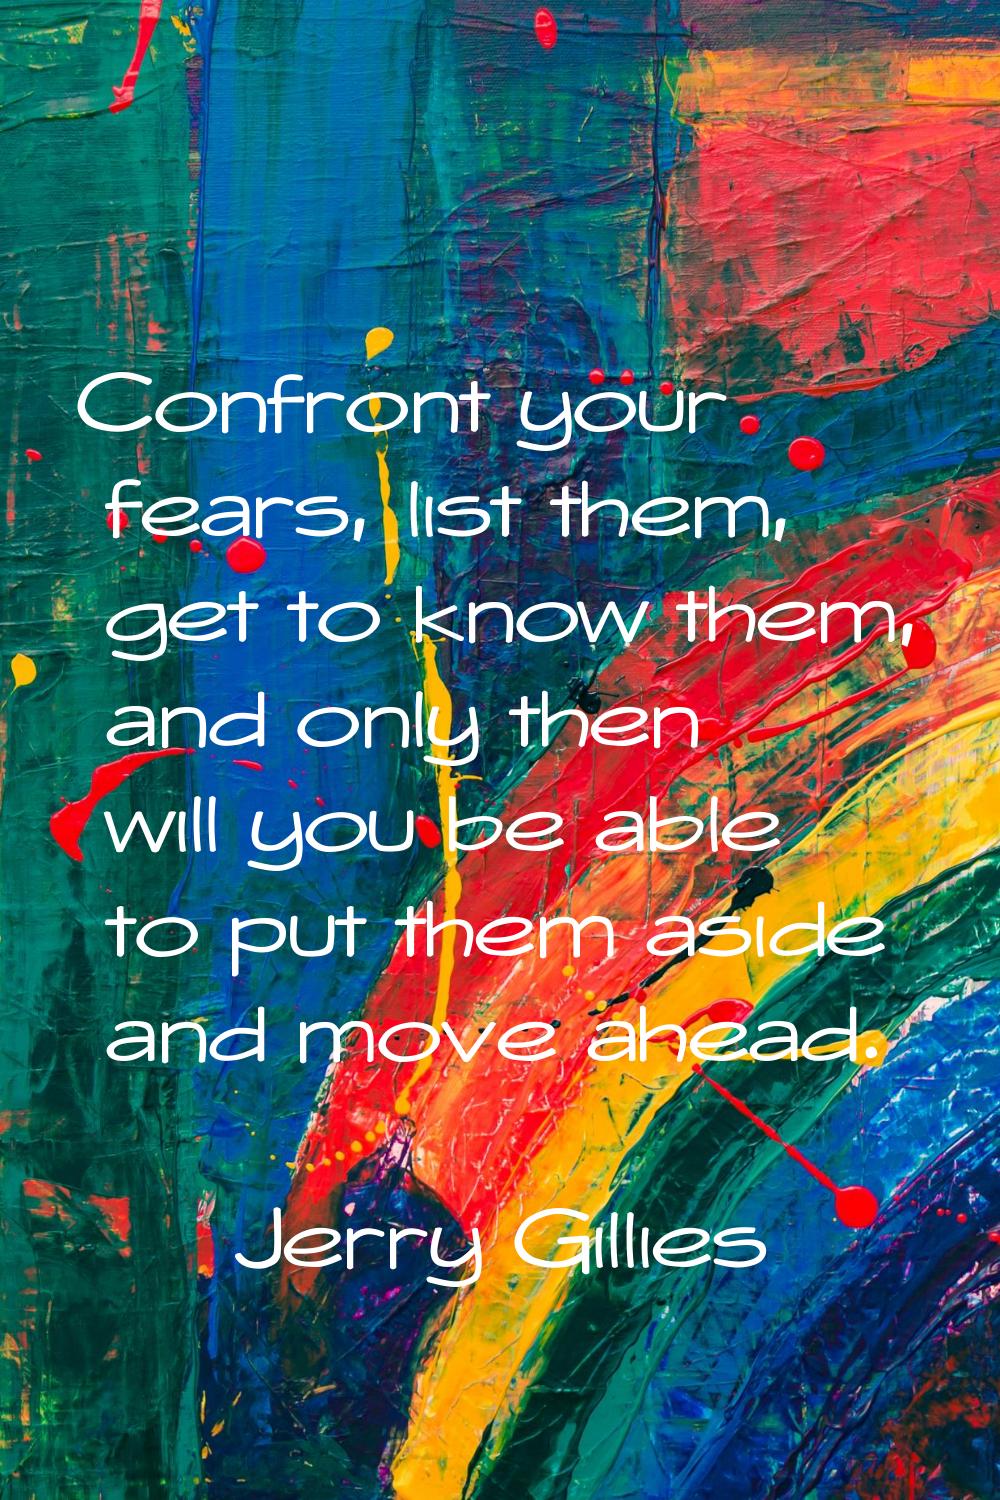 Confront your fears, list them, get to know them, and only then will you be able to put them aside 